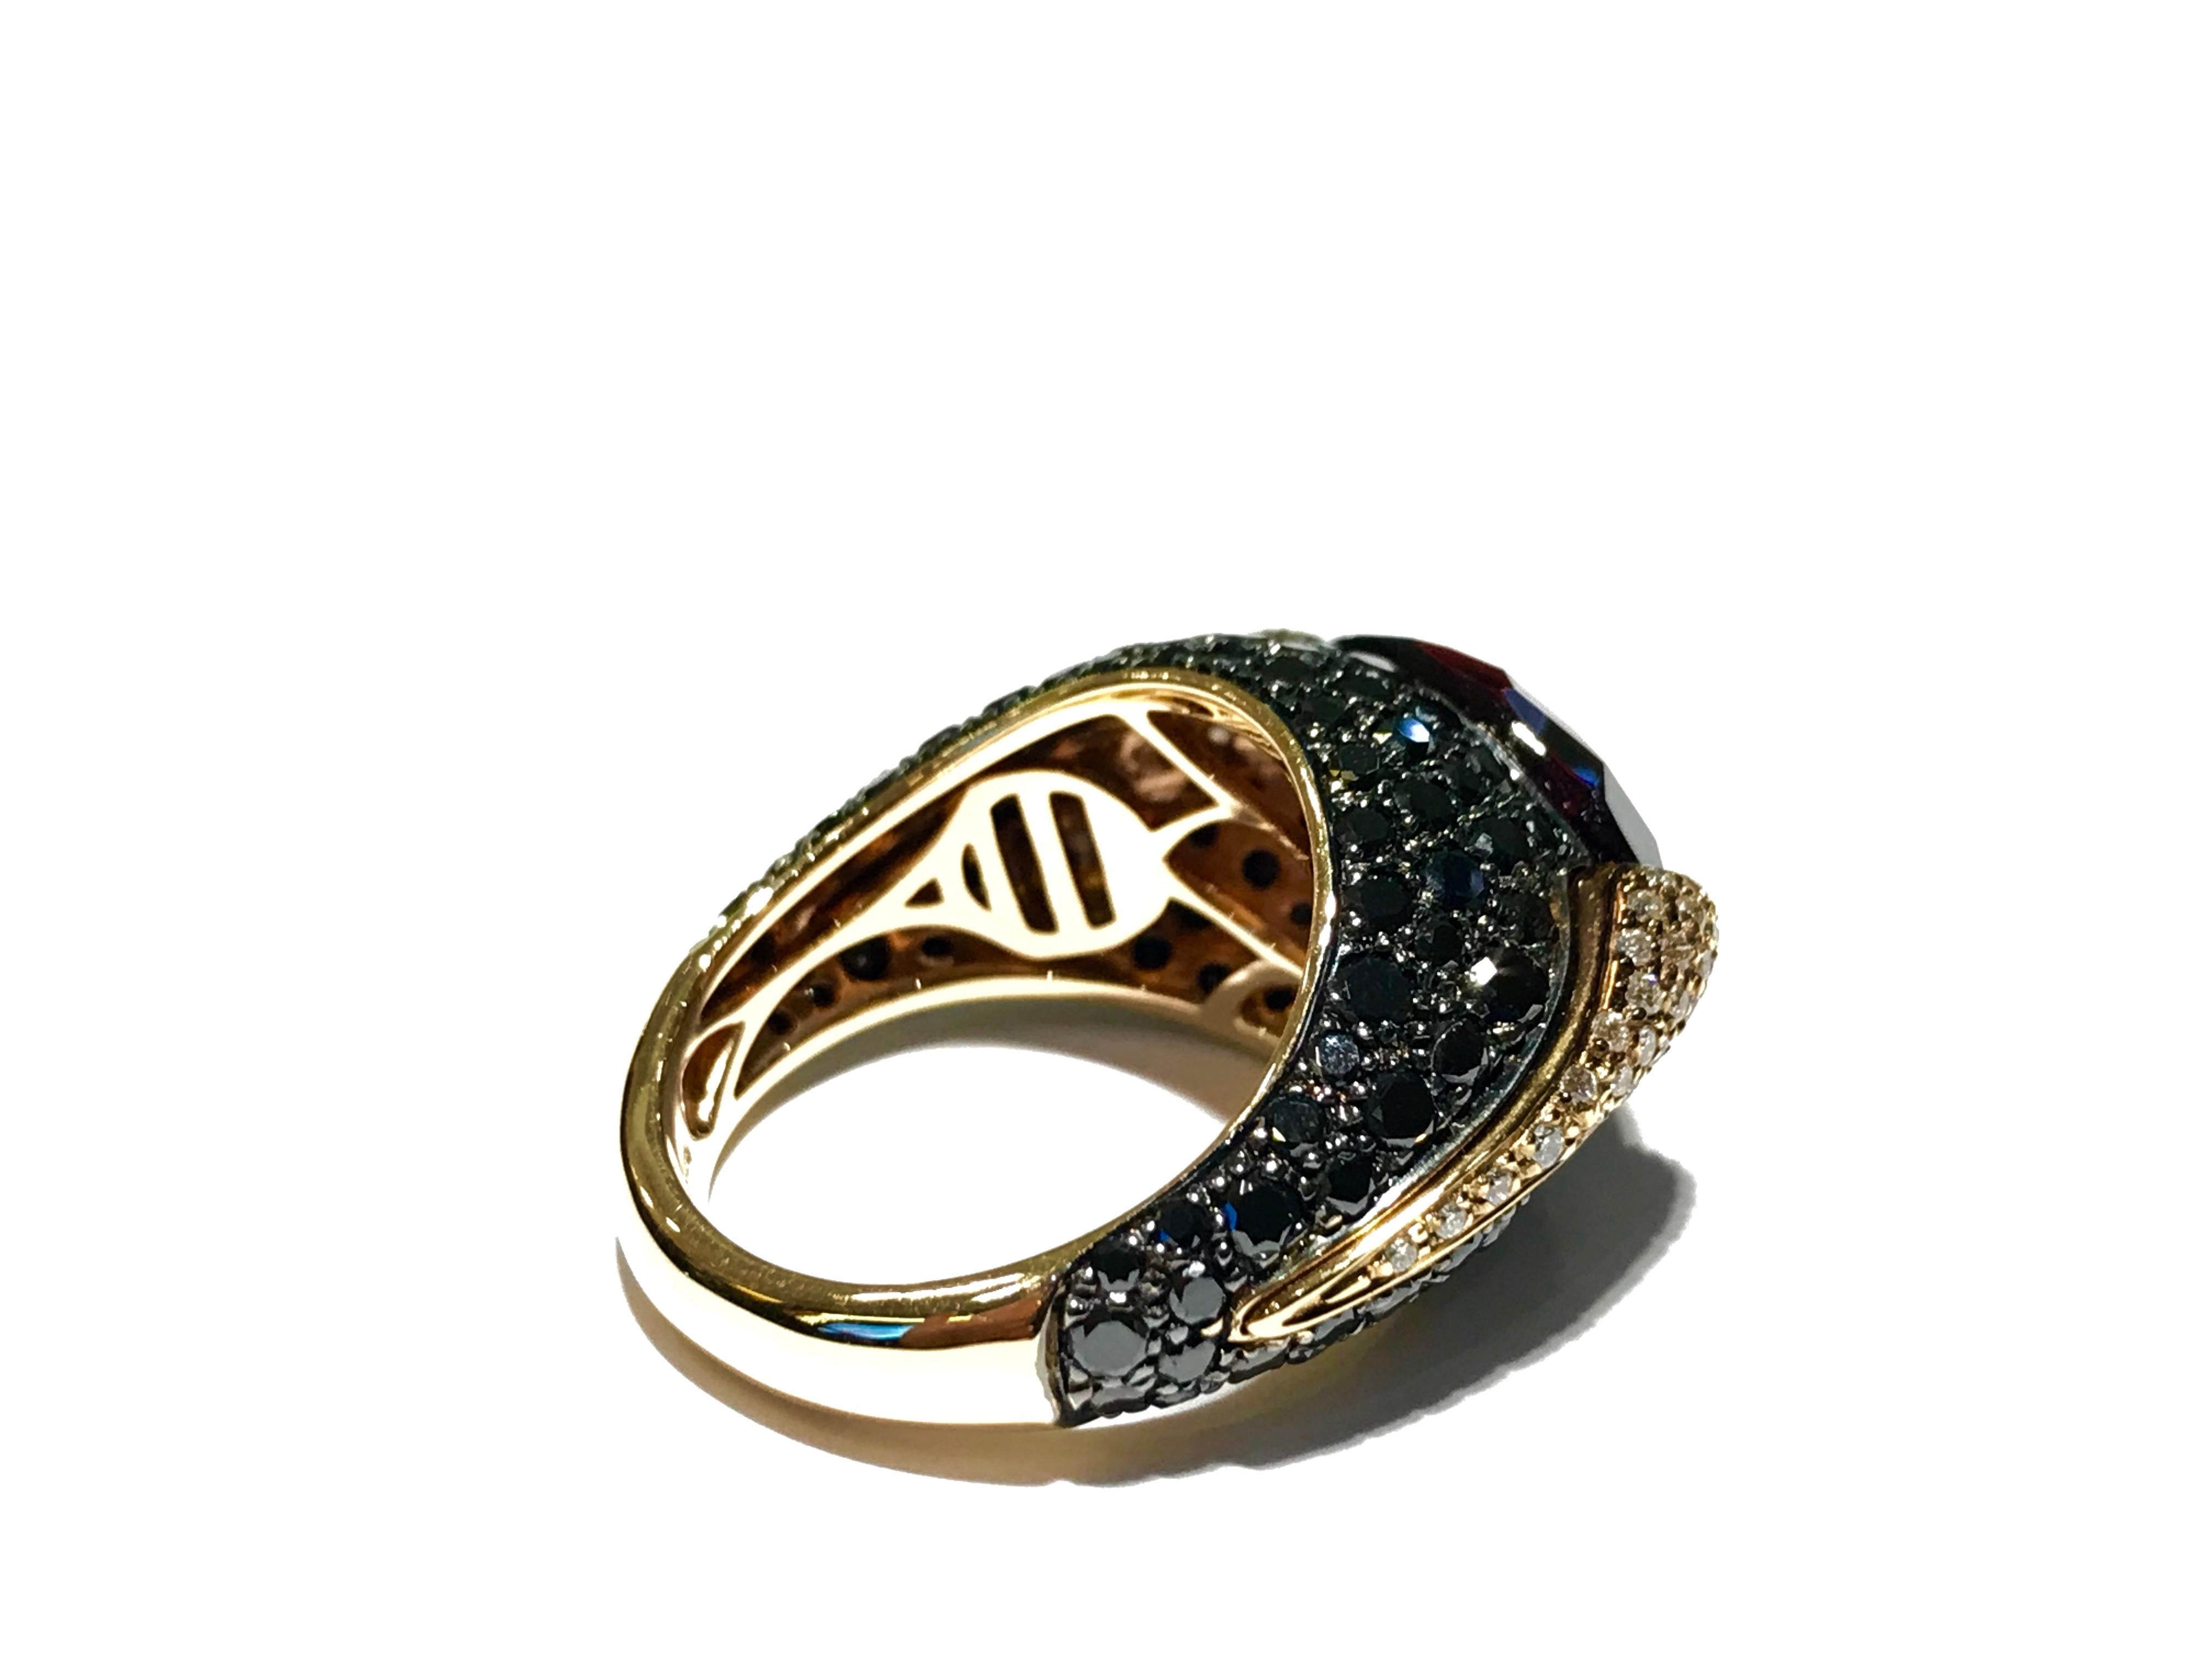 Red Garnet and diamond ring set in 18 k rose gold 
Mimi Italian designer Red Garnet ring with a mix of black and white diamonds 
set in 18 k rose gold 
